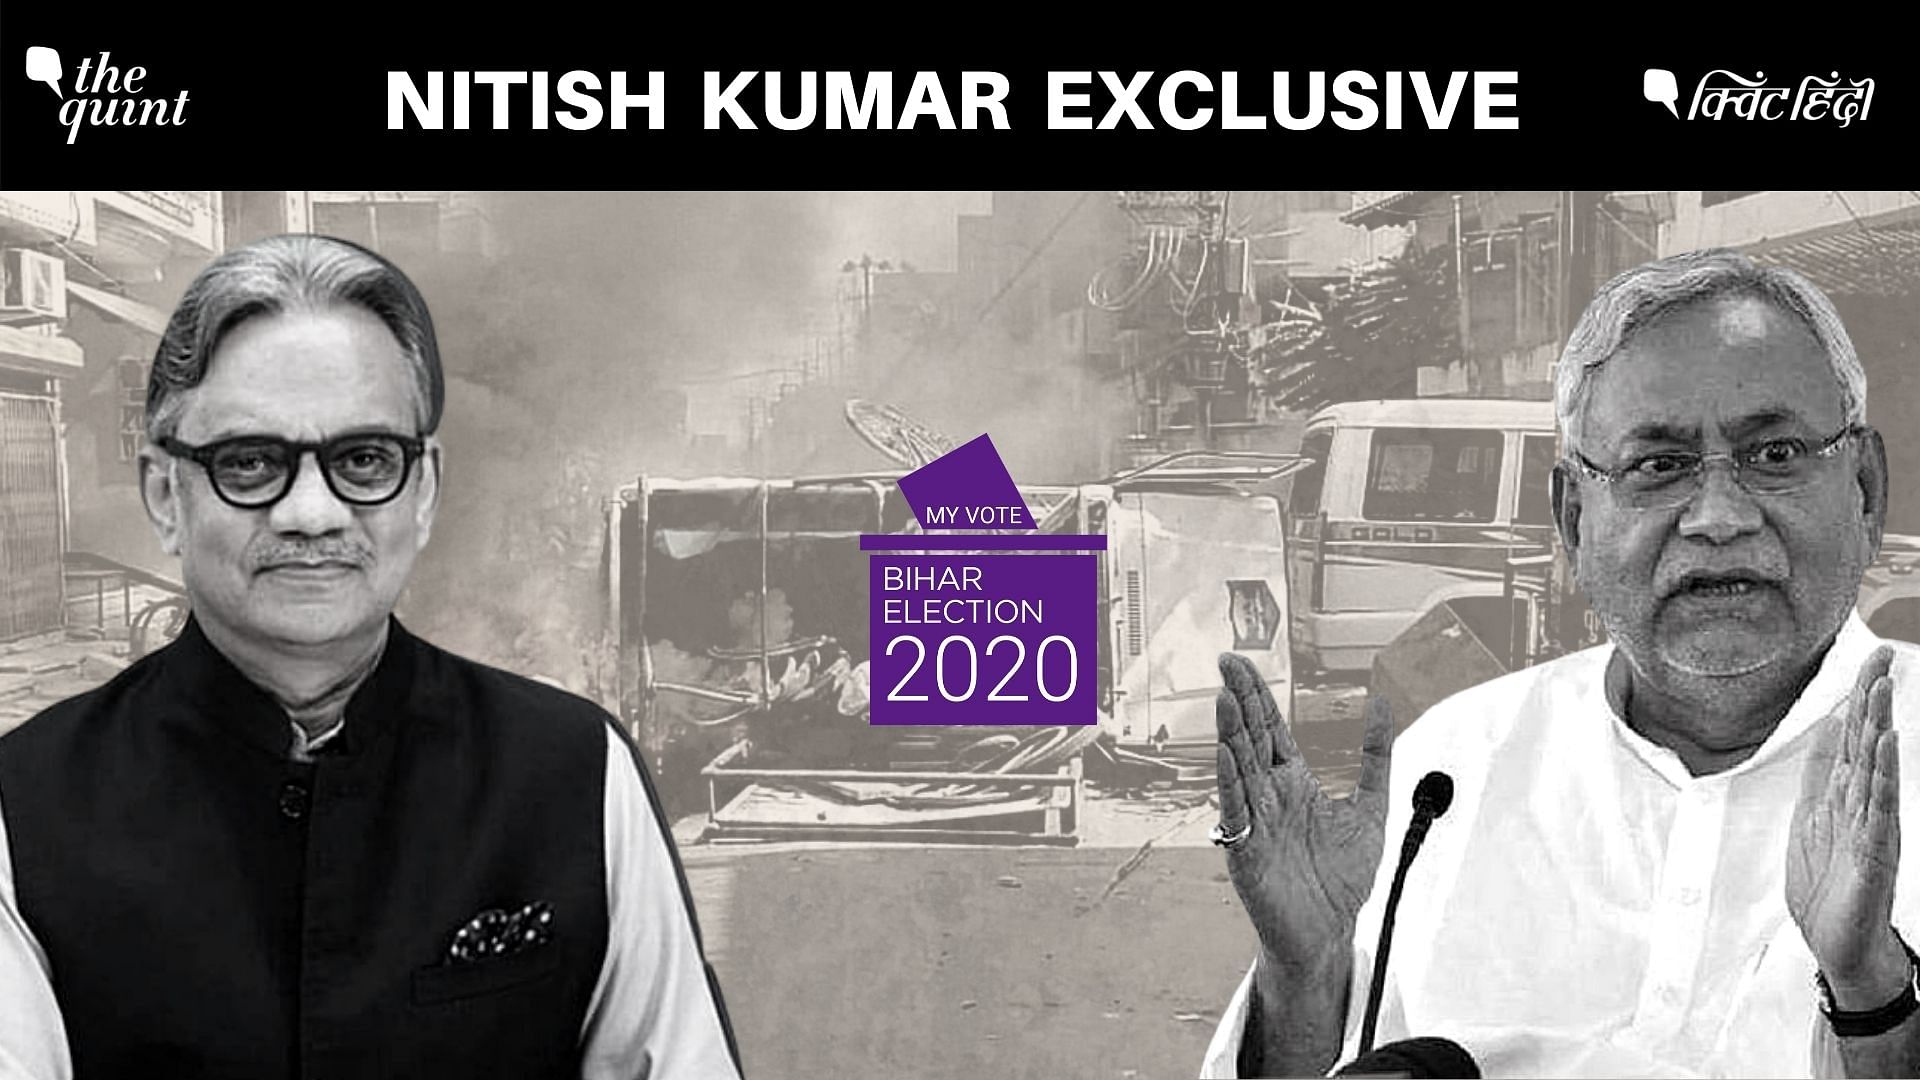 With the Assembly Elections underway in Bihar, the state’s Chief Minister Nitish Kumar on Sunday, 1 November, shared his thoughts on RDJ’s rallies, as well as the opposition party’s promise of 10 lakh jobs, in an exclusive conversation with The Quint’s Editorial Director Sanjay Pugalia.